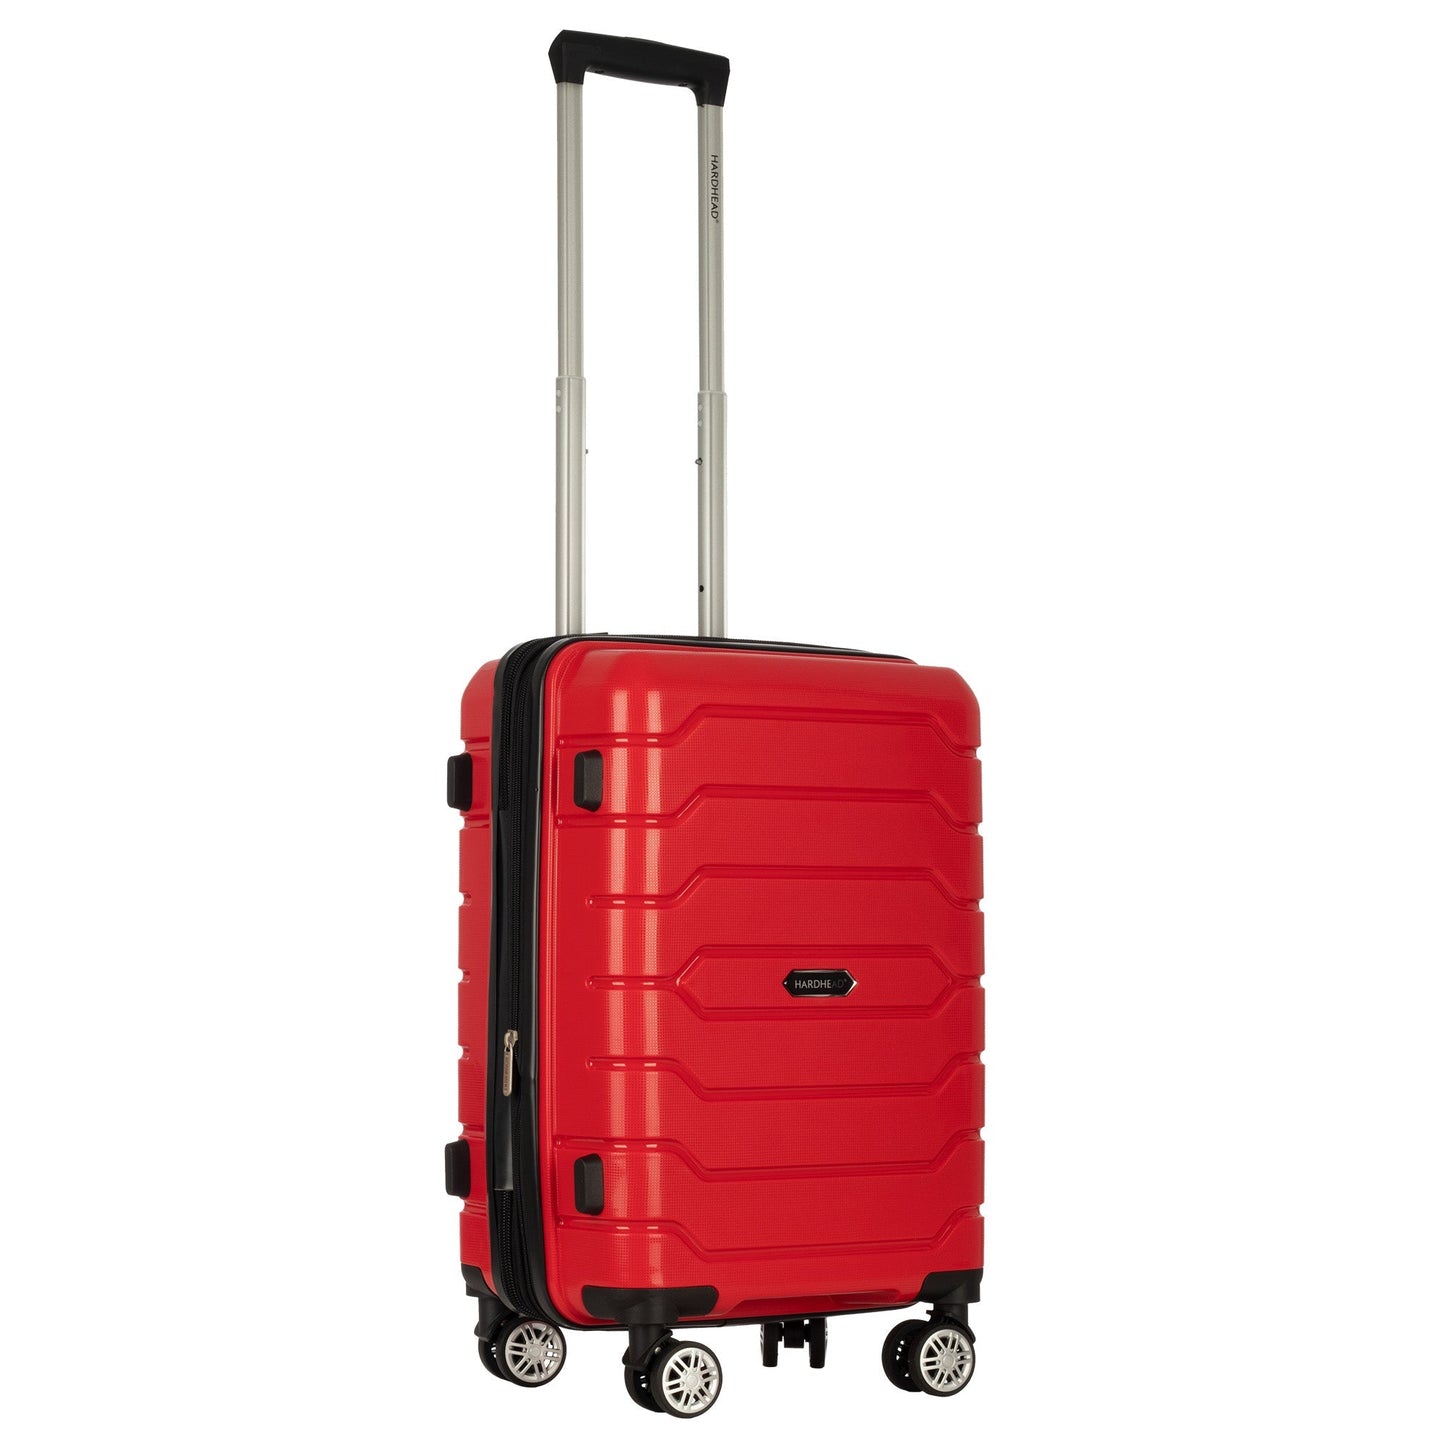 Ian Collection Red Luggage (20") Suitcase Lock Spinner Hardshell